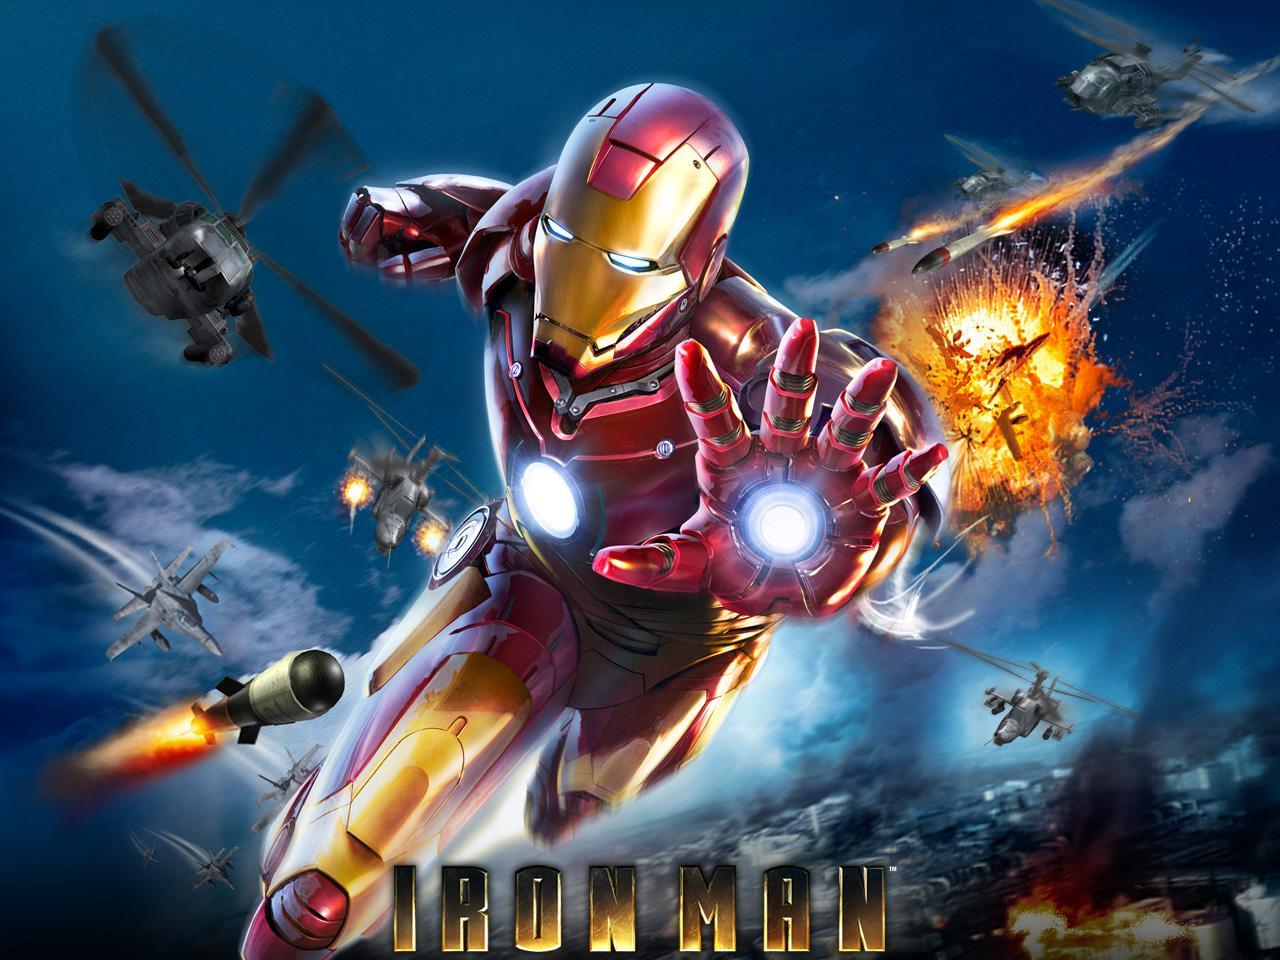 Download Iron Man wallpaper for mobile phone, free Iron Man HD picture